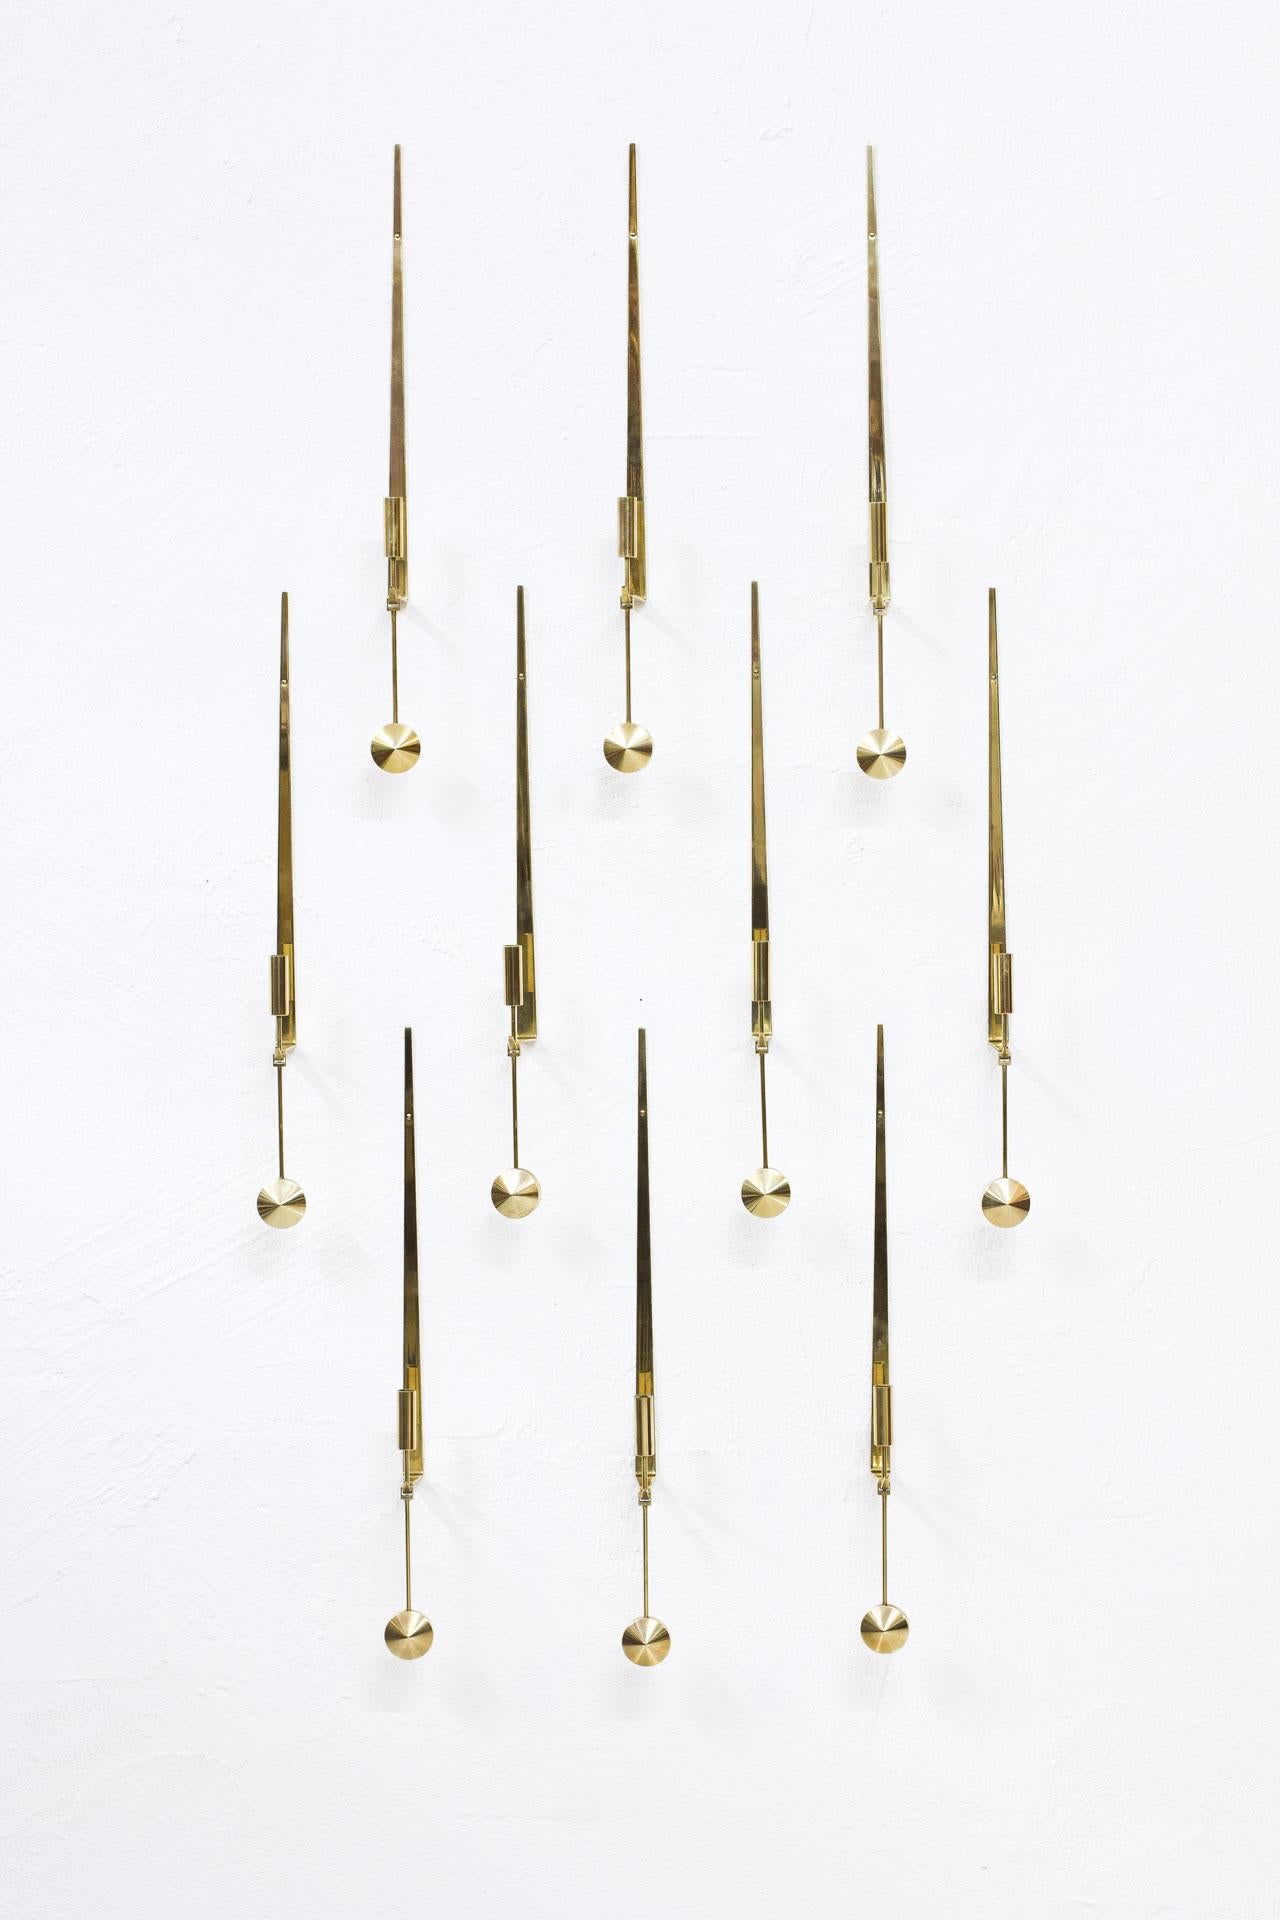 Group of ten wall mounted “Pendulum” candlesticks designed by Pierre Forssell. Manufactured in Sweden by Skultuna during the 1960s. Made from brass. Signed. Very good vintage condition with patina and signs of wear. Price for the set of ten.